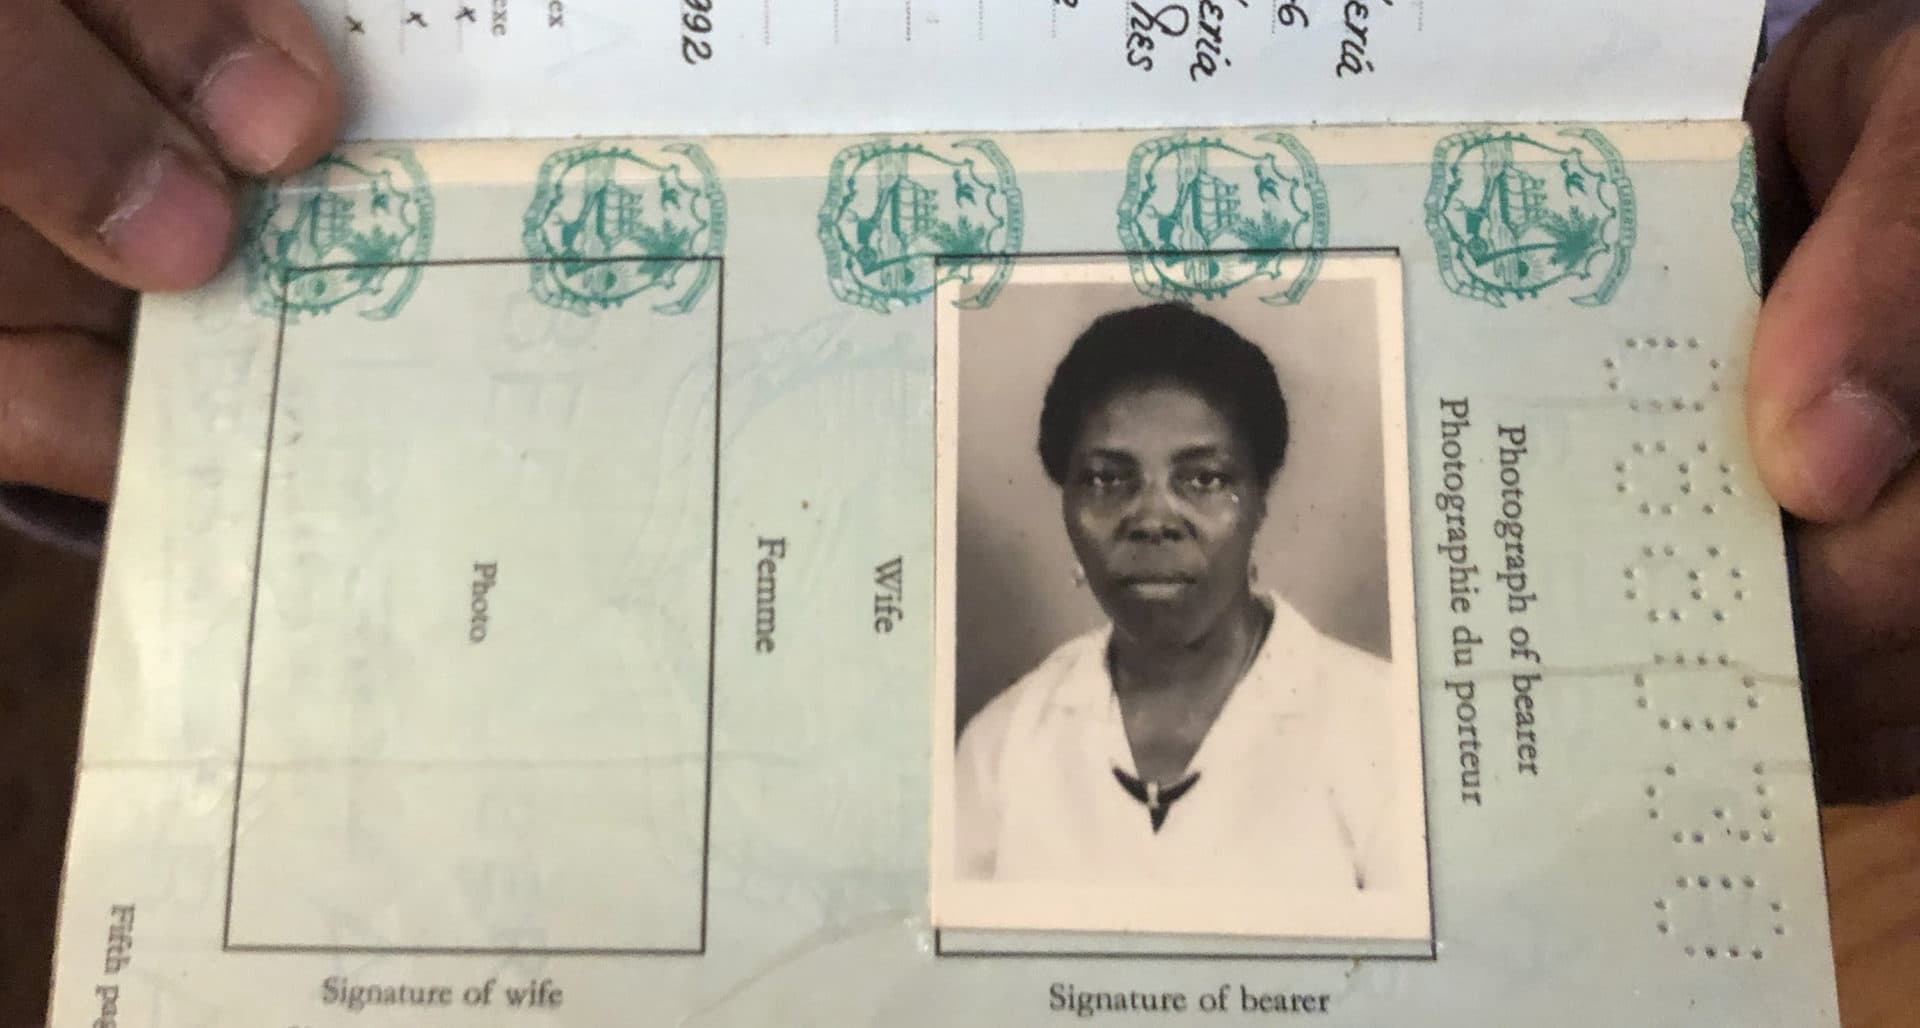 Nora Ketter's Liberian passport. She came to the U.S. in 1989 on a visitor visa. (Lynn Jolicoeur/WBUR)